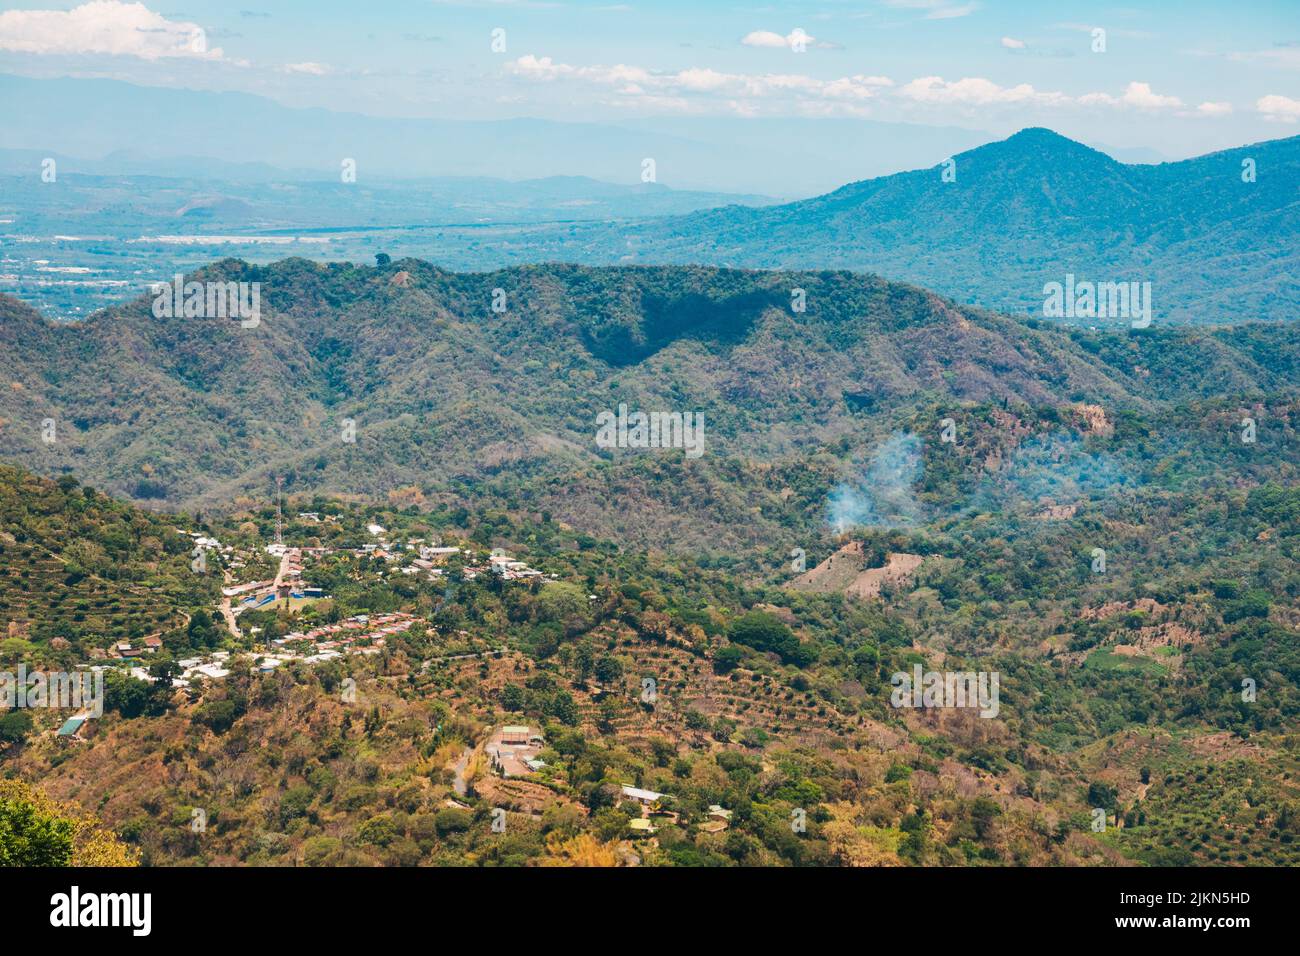 Looking at the small rural town of Talnique, nestled in the mountains inland El Salvador Stock Photo